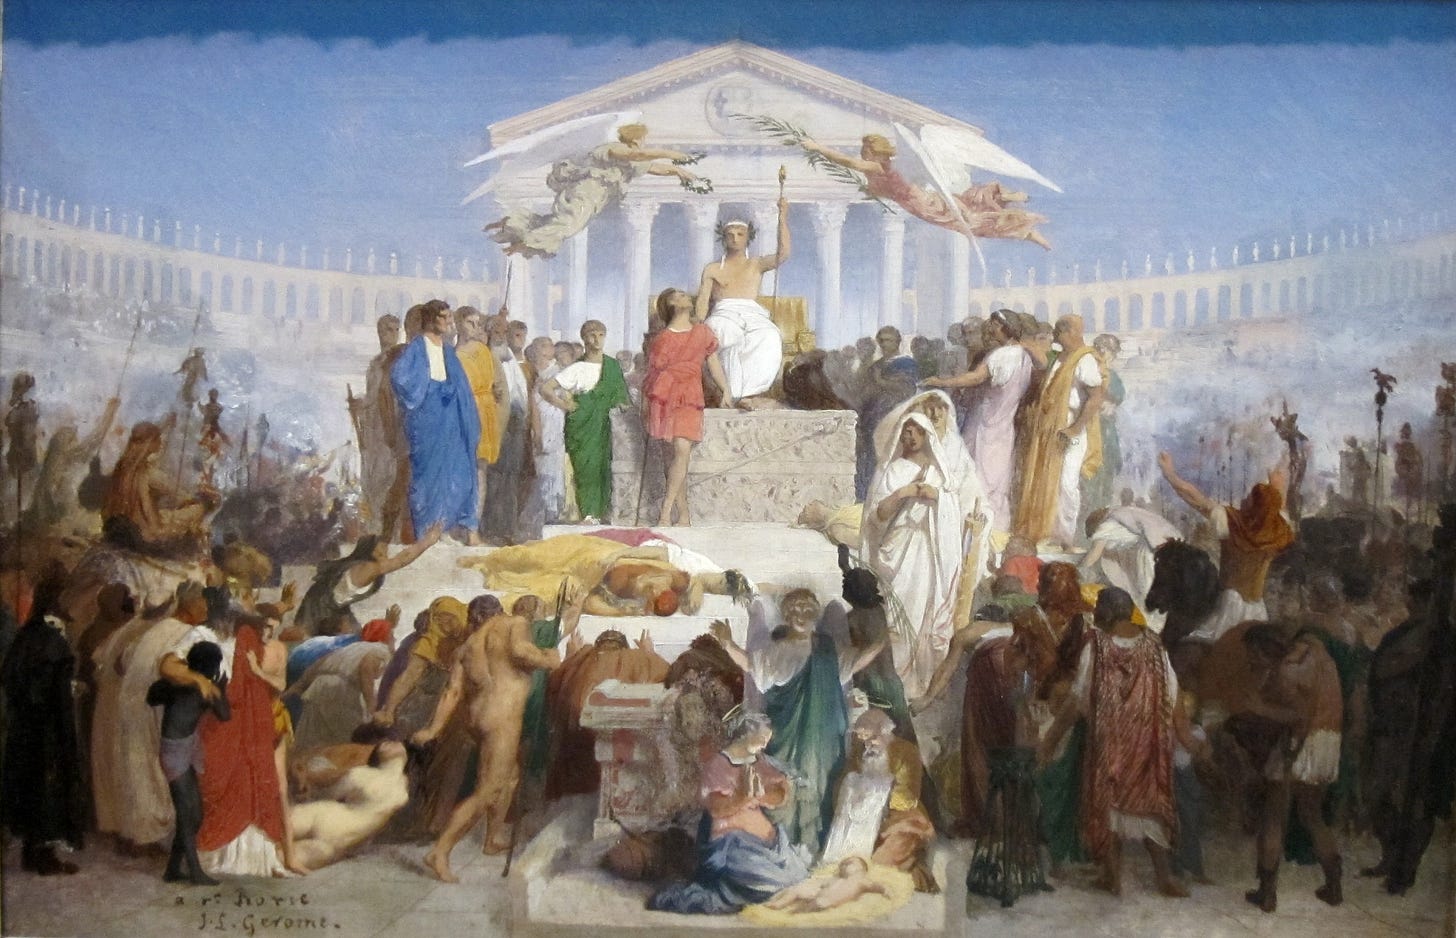 https://upload.wikimedia.org/wikipedia/commons/f/f0/The_Age_of_Augustus%2C_the_Birth_of_Christ_by_Jean-L%C3%A9on_G%C3%A9r%C3%B4me%2C_c._1852-54.JPG